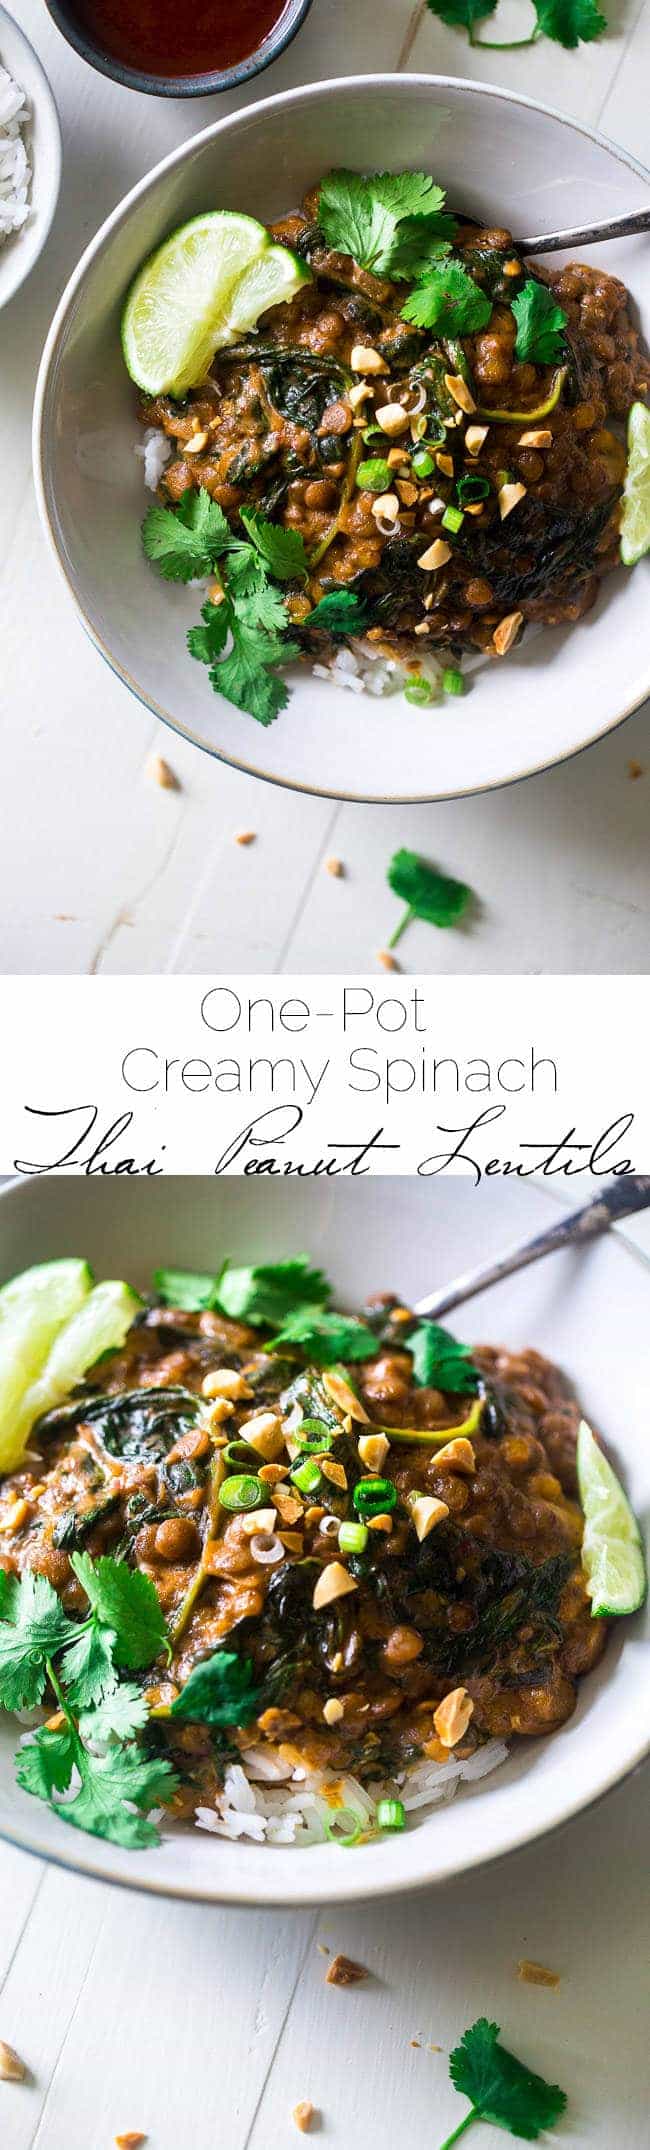 One-Pot Creamy Spinach Lentils - These Thai-style lentils are stewed in creamy peanut butter and coconut milk. They're a vegetarian, one pot wonder that is perfect for Meatless Monday! | Foodfaithfitness.com | @FoodFaithFit